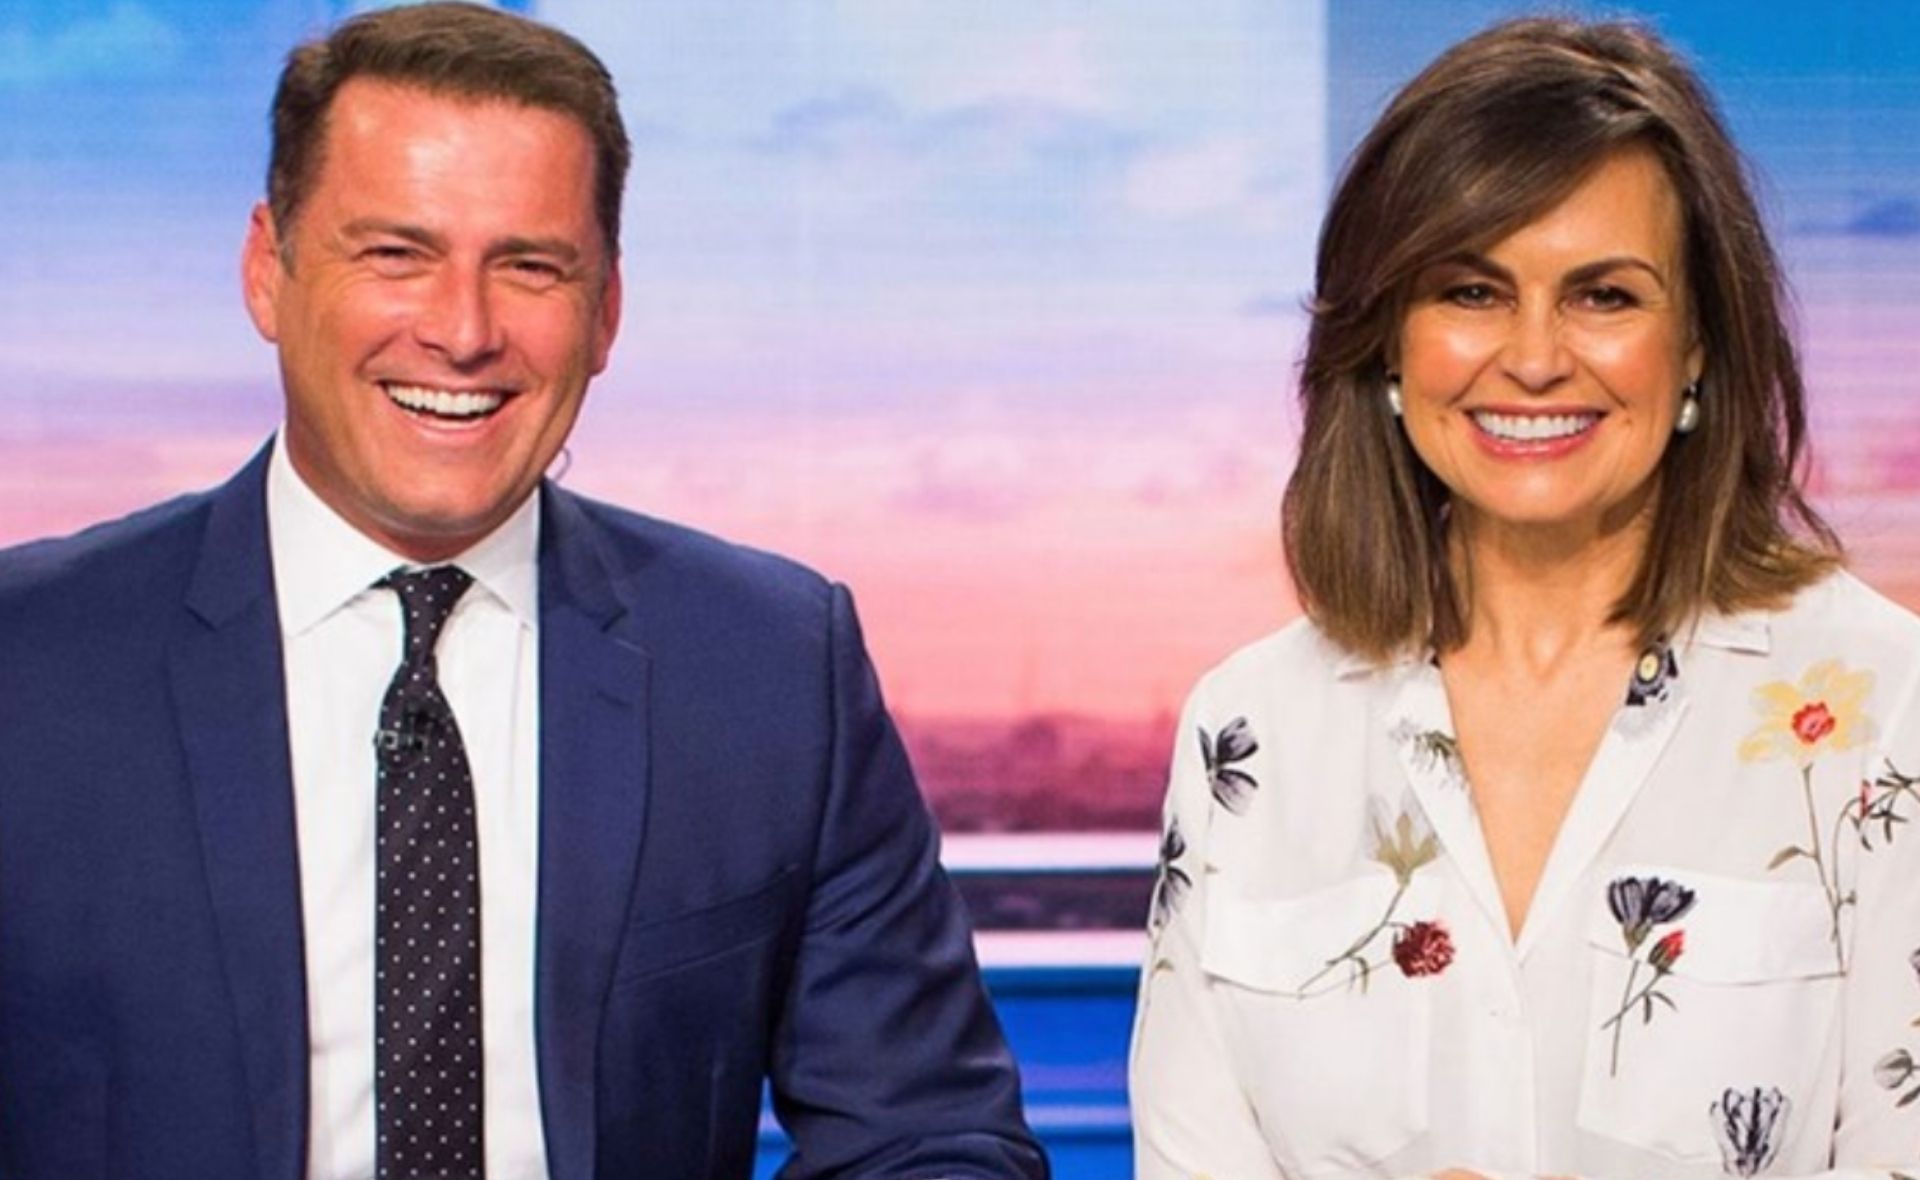 Lisa Wilkinson reveals new details about what happened when Karl Stefanovic arrived at Today “still drunk”